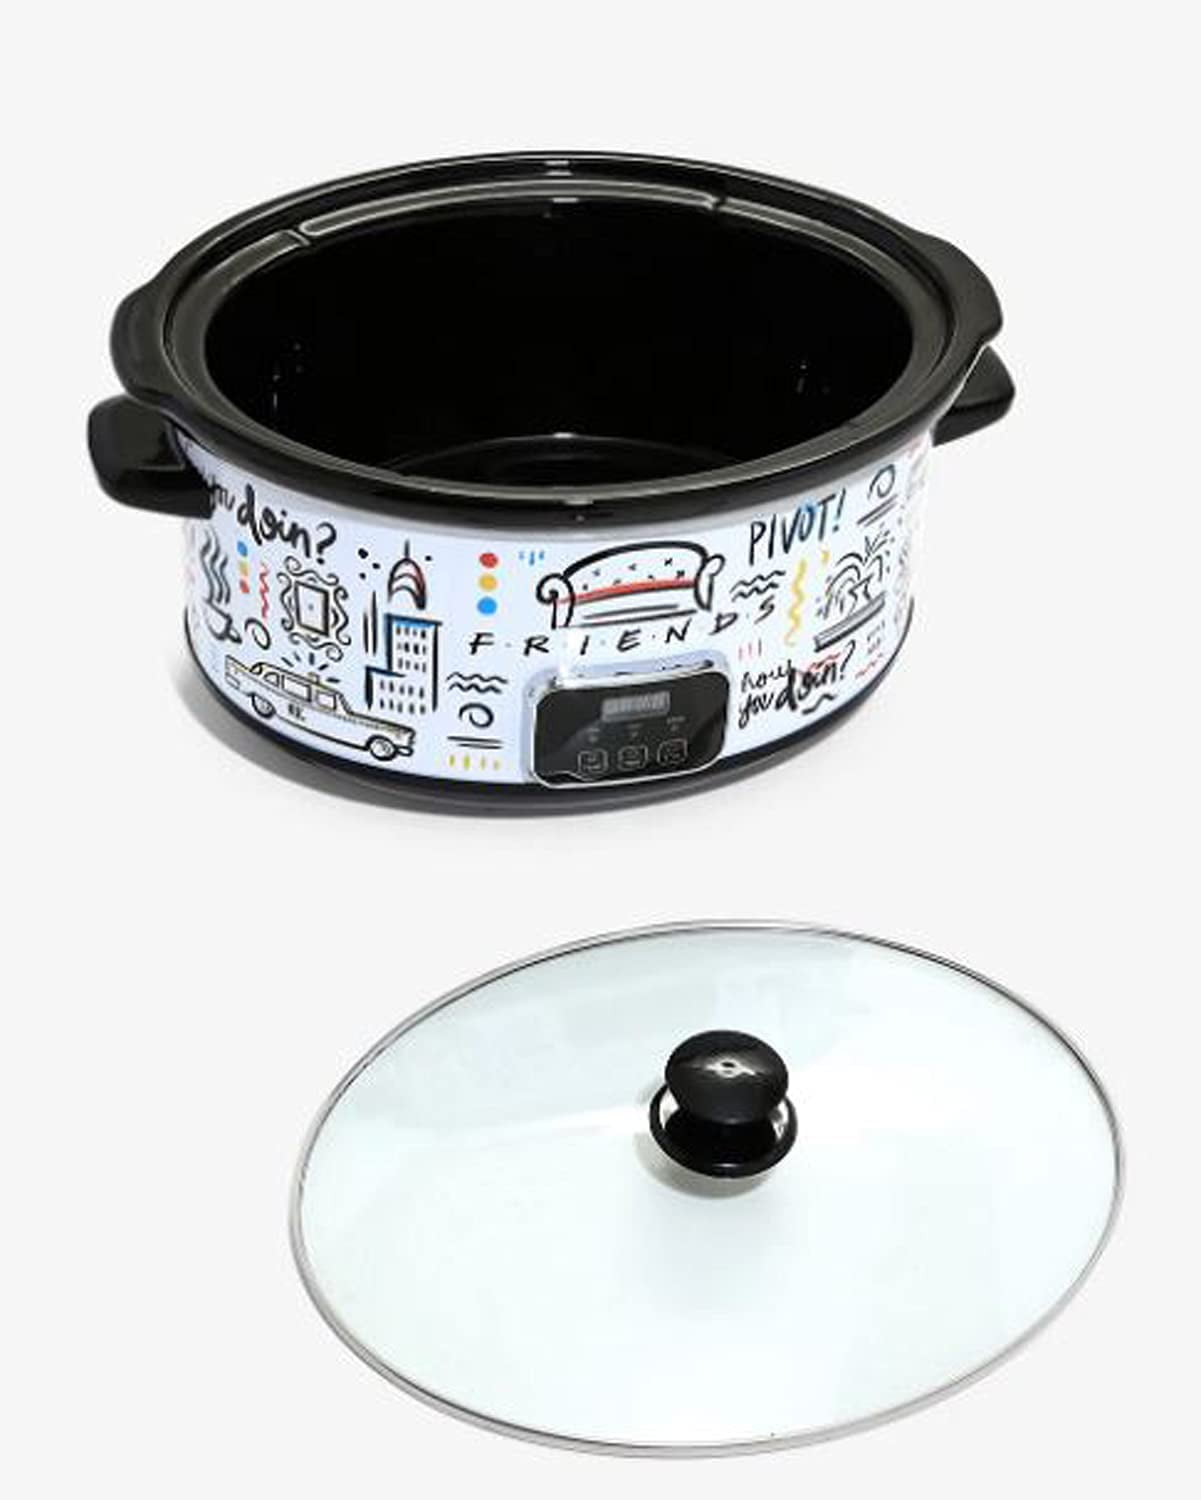 You Can Buy A 'Friends'-Themed Slow Cooker